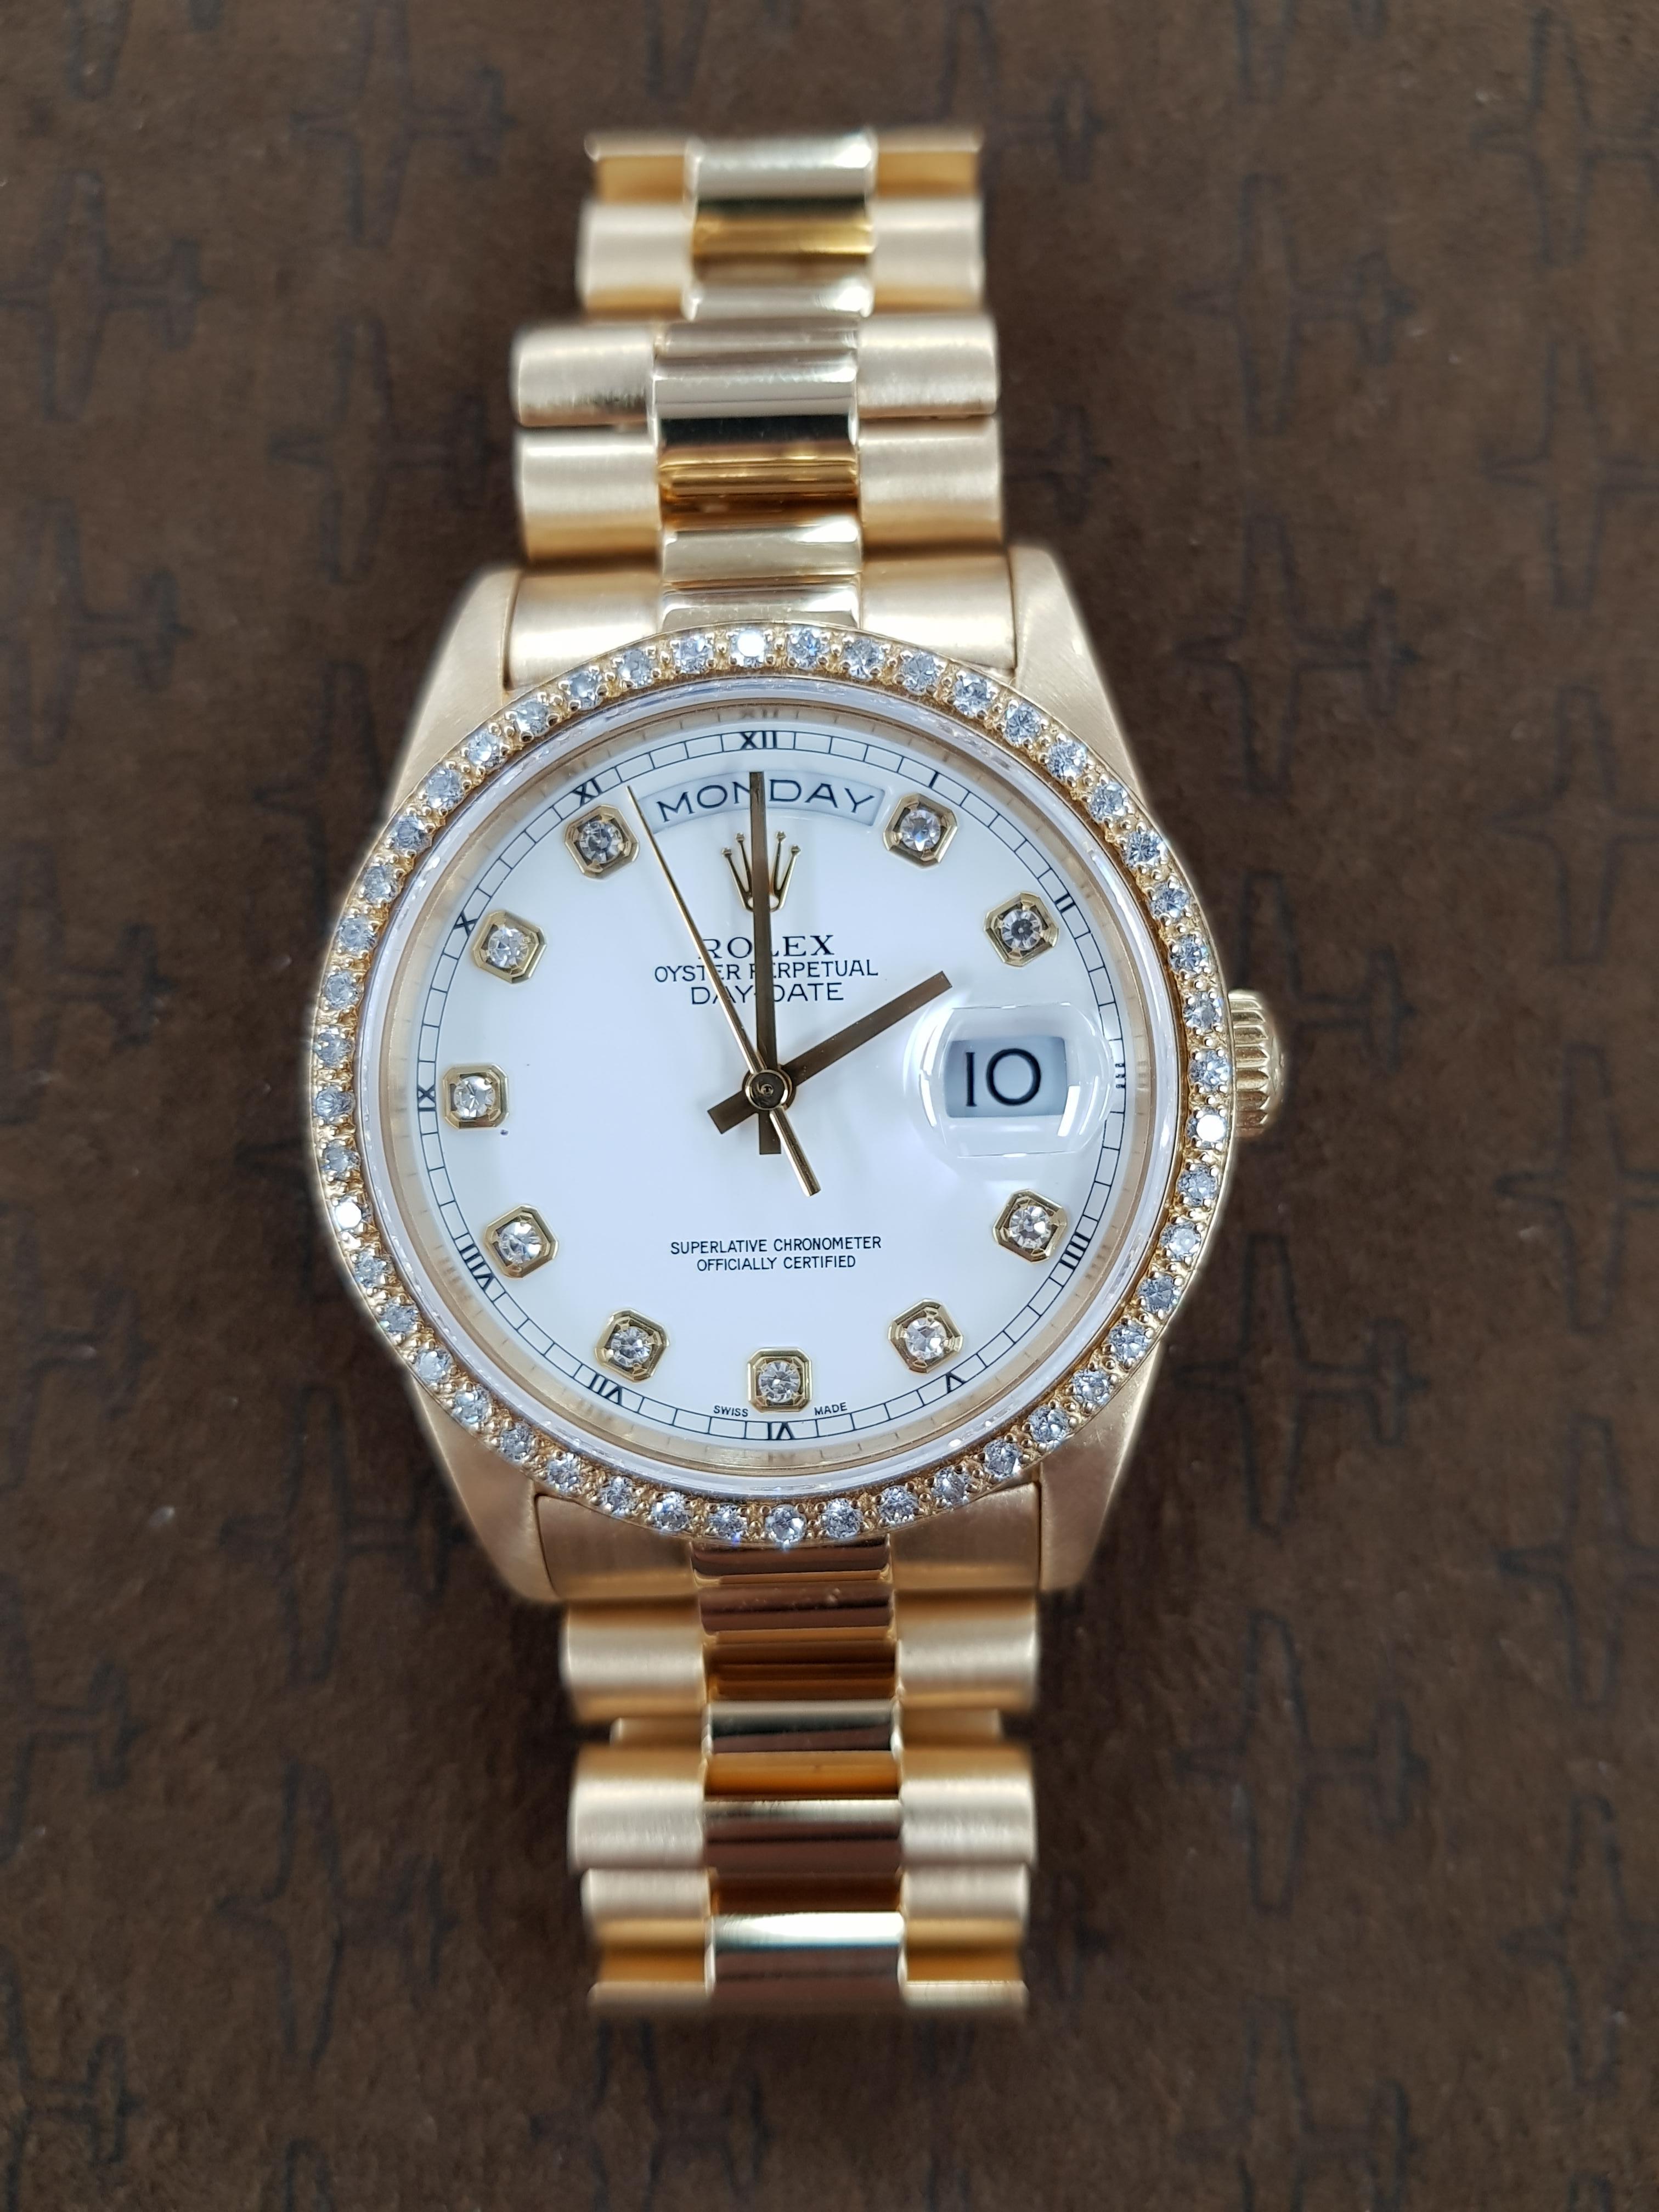 Rolex Day Date in yellow gold with a unique diamond bezel and 36mm dial.